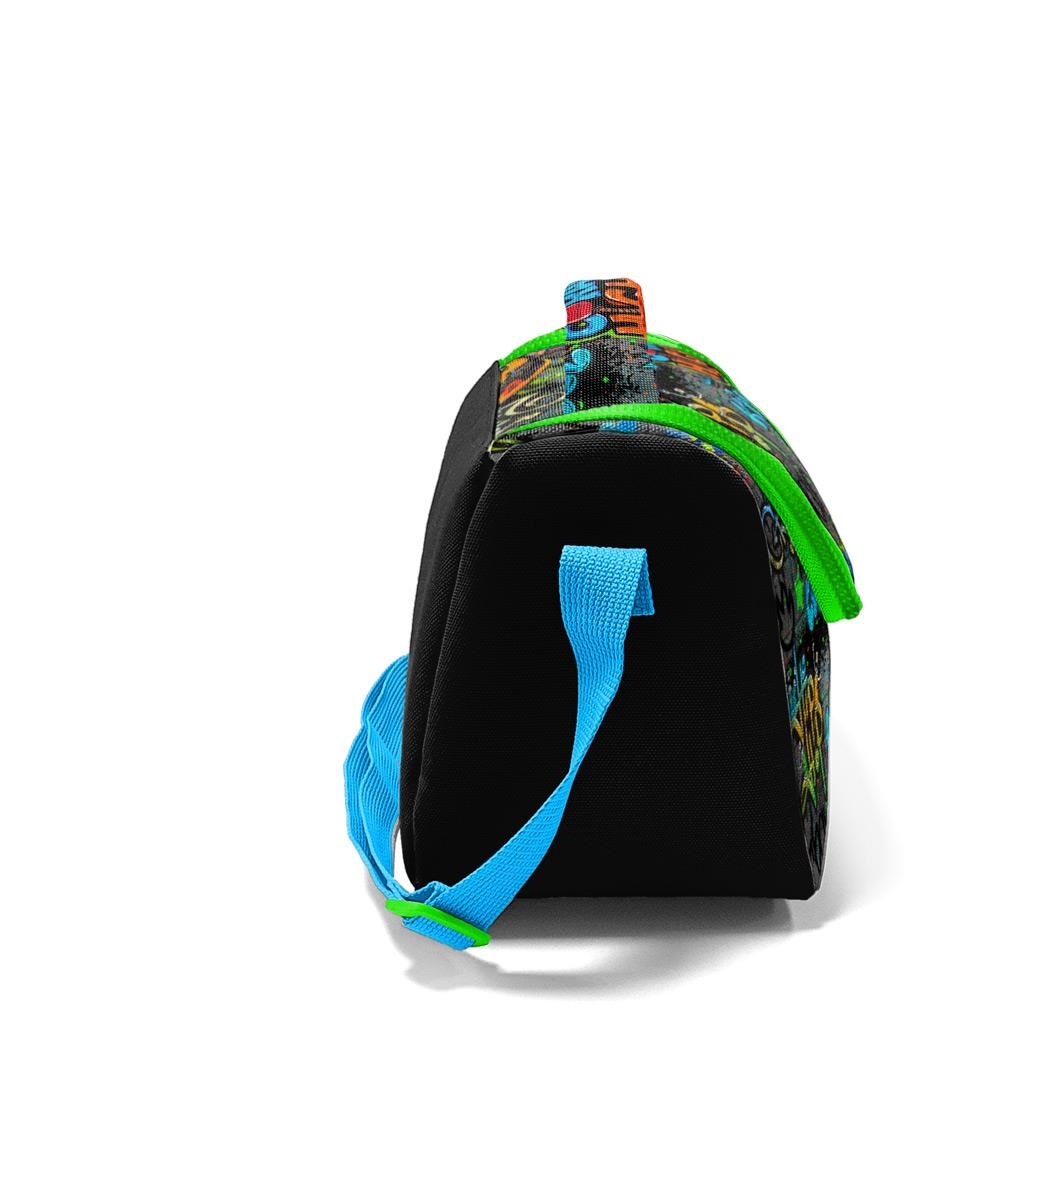 Coral High Kids Thermal Lunch Bag - Black Blue Graffiti Patterned